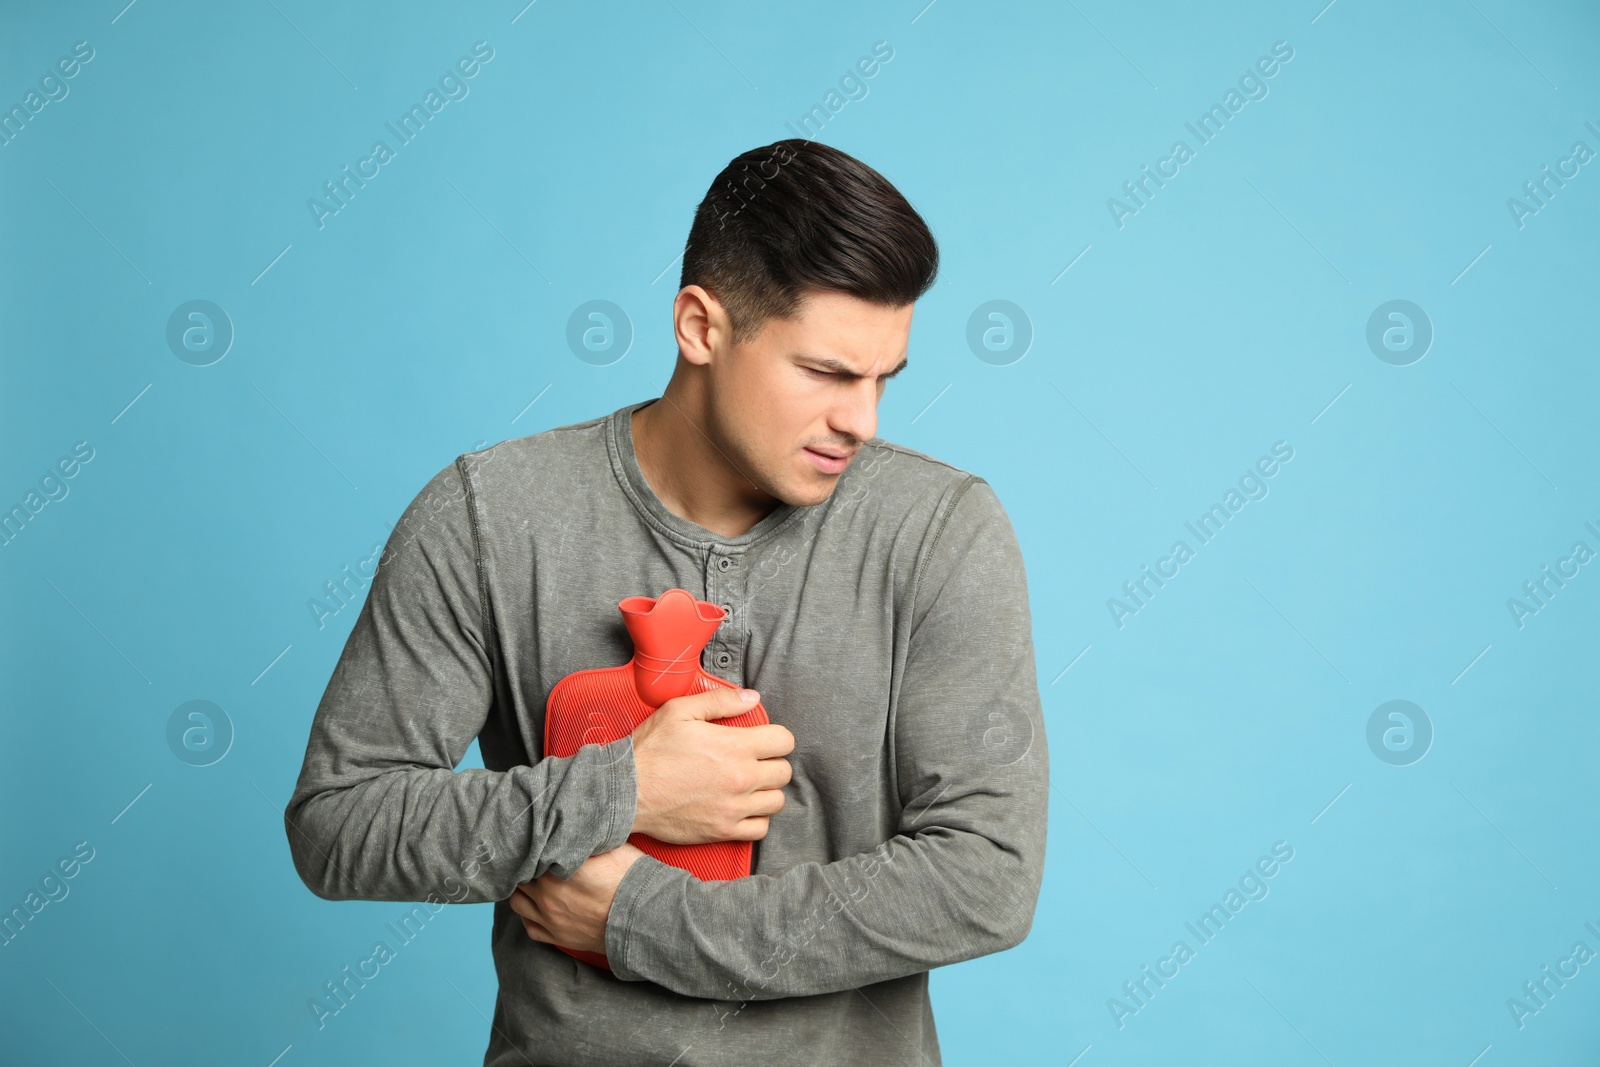 Photo of Man using hot water bottle to relieve chest pain on light blue background